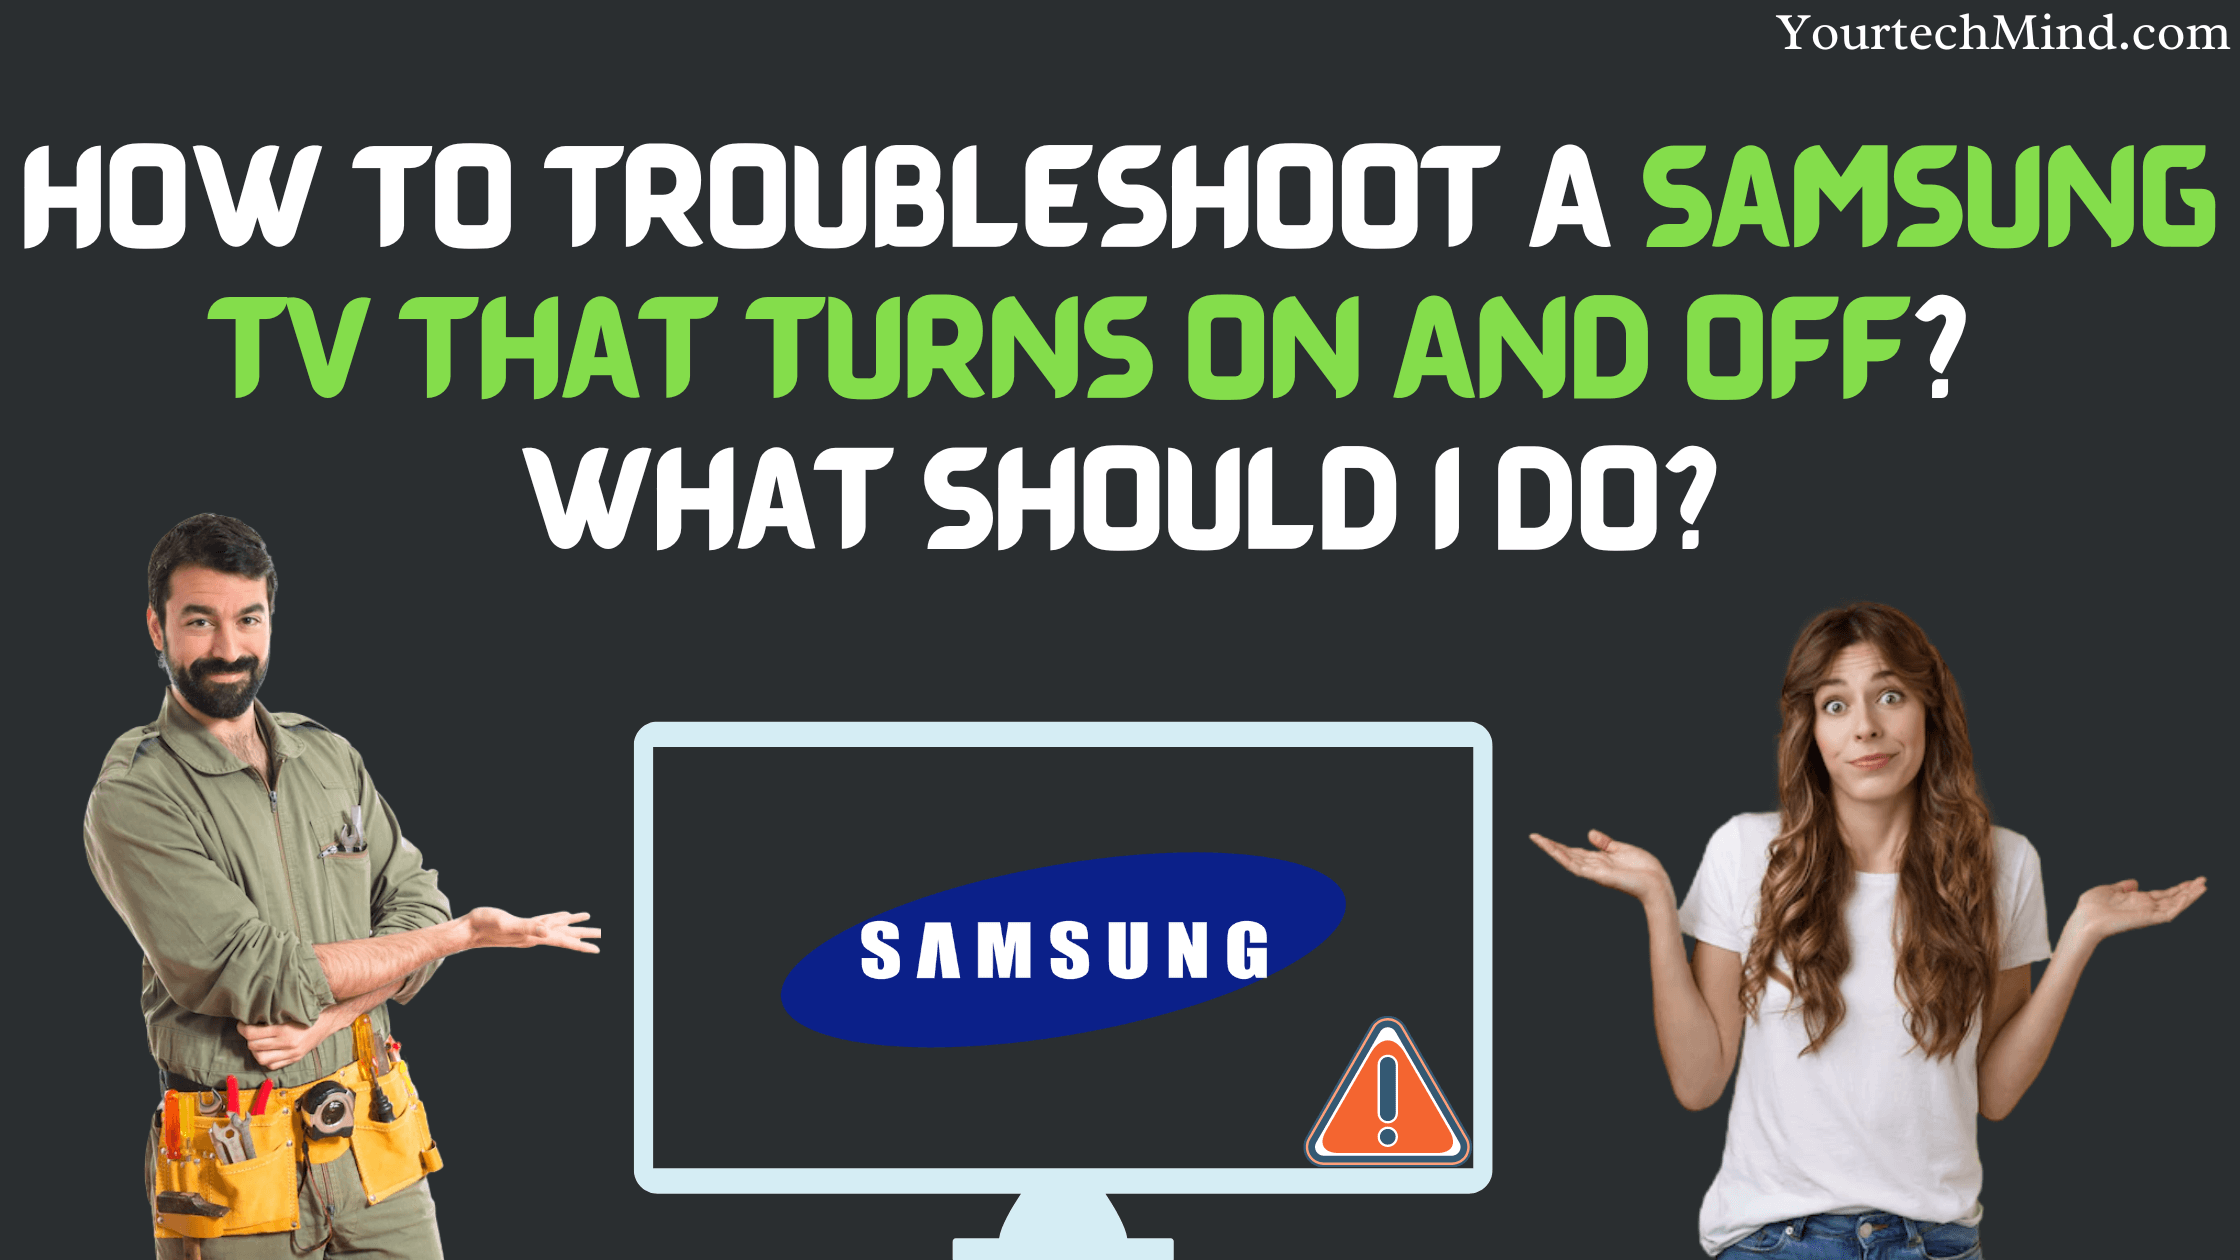 How To Troubleshoot A Samsung TV That Turns On And Off?